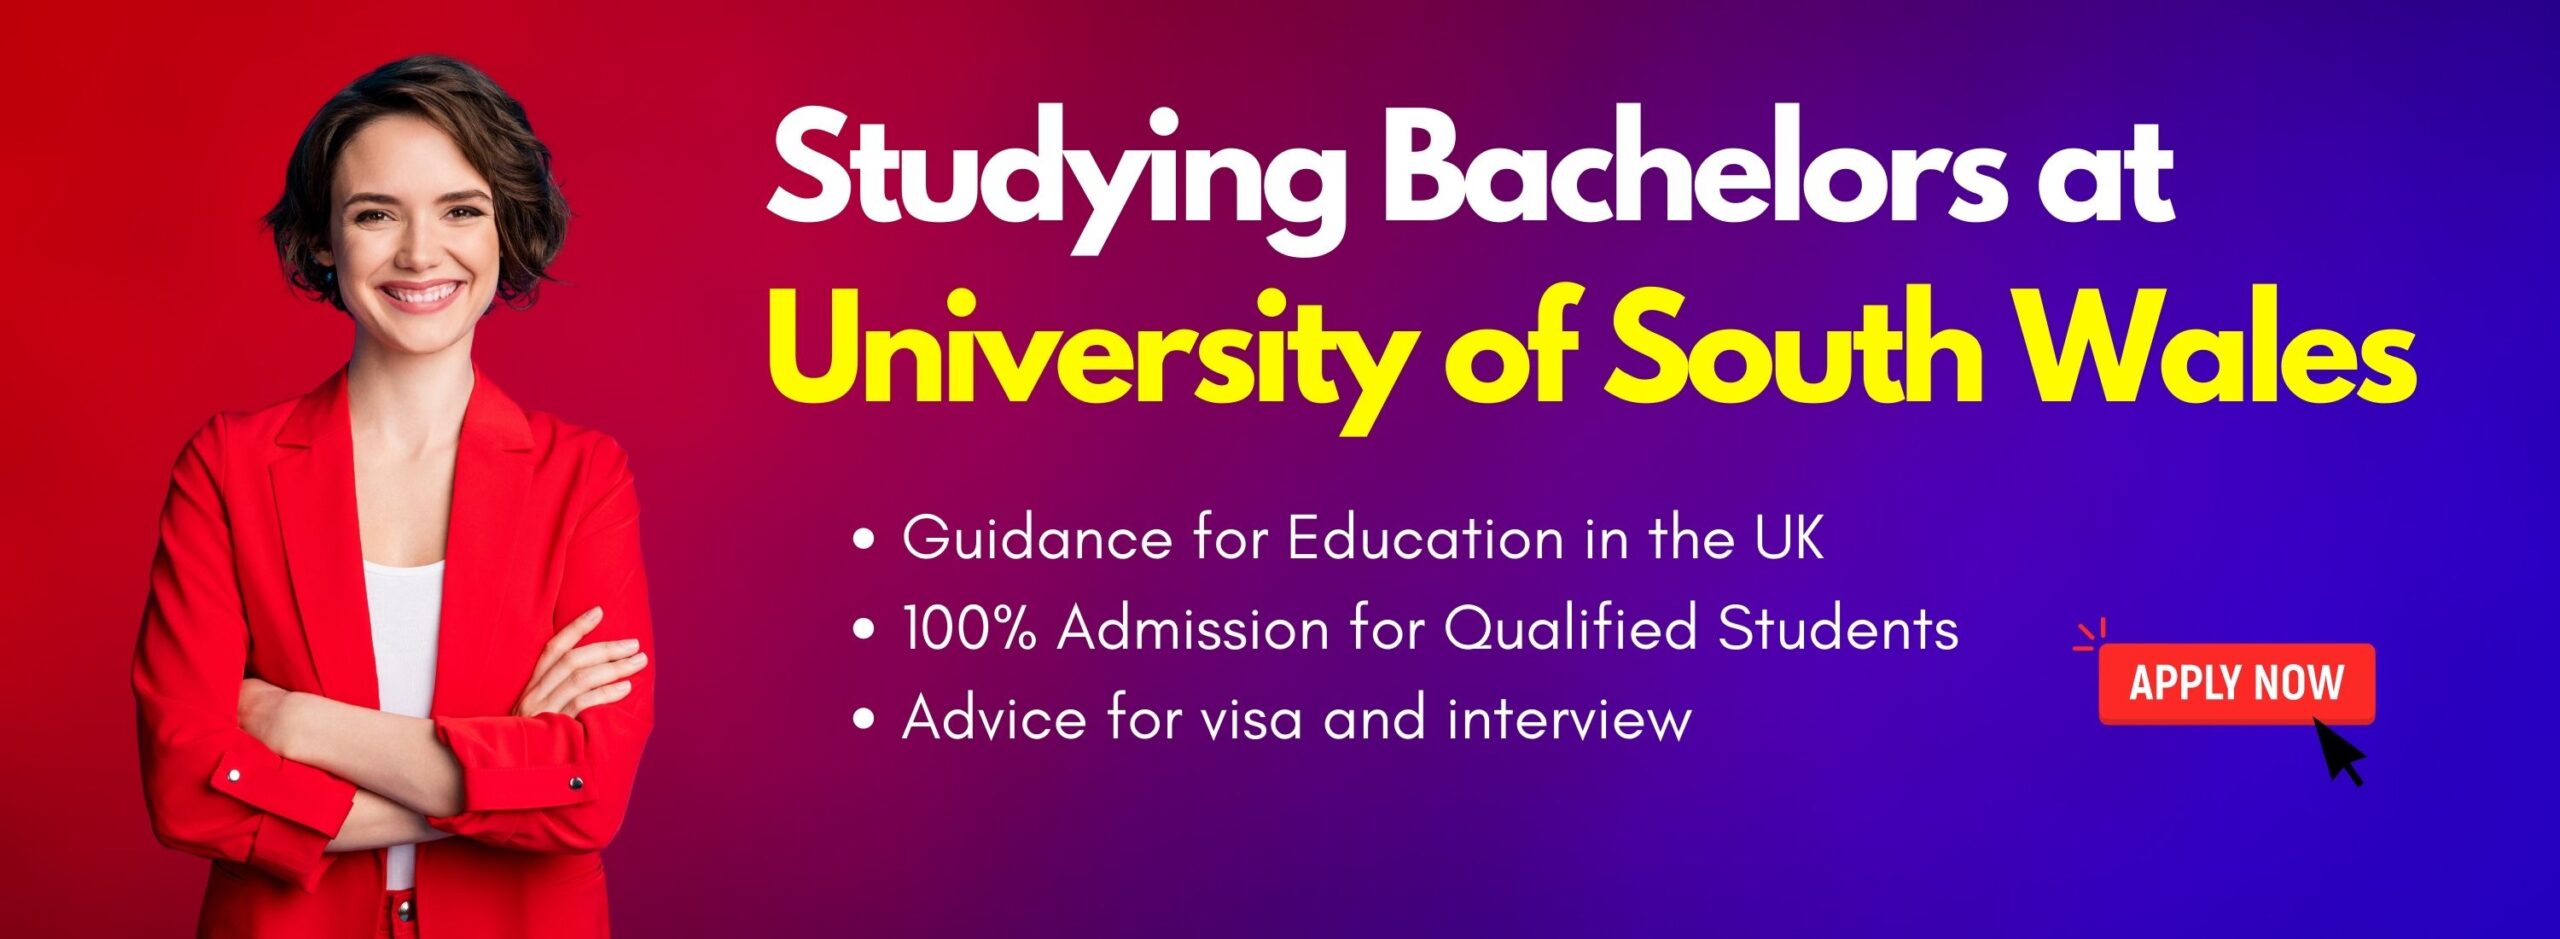 Studying Bachelors at University of South Wales